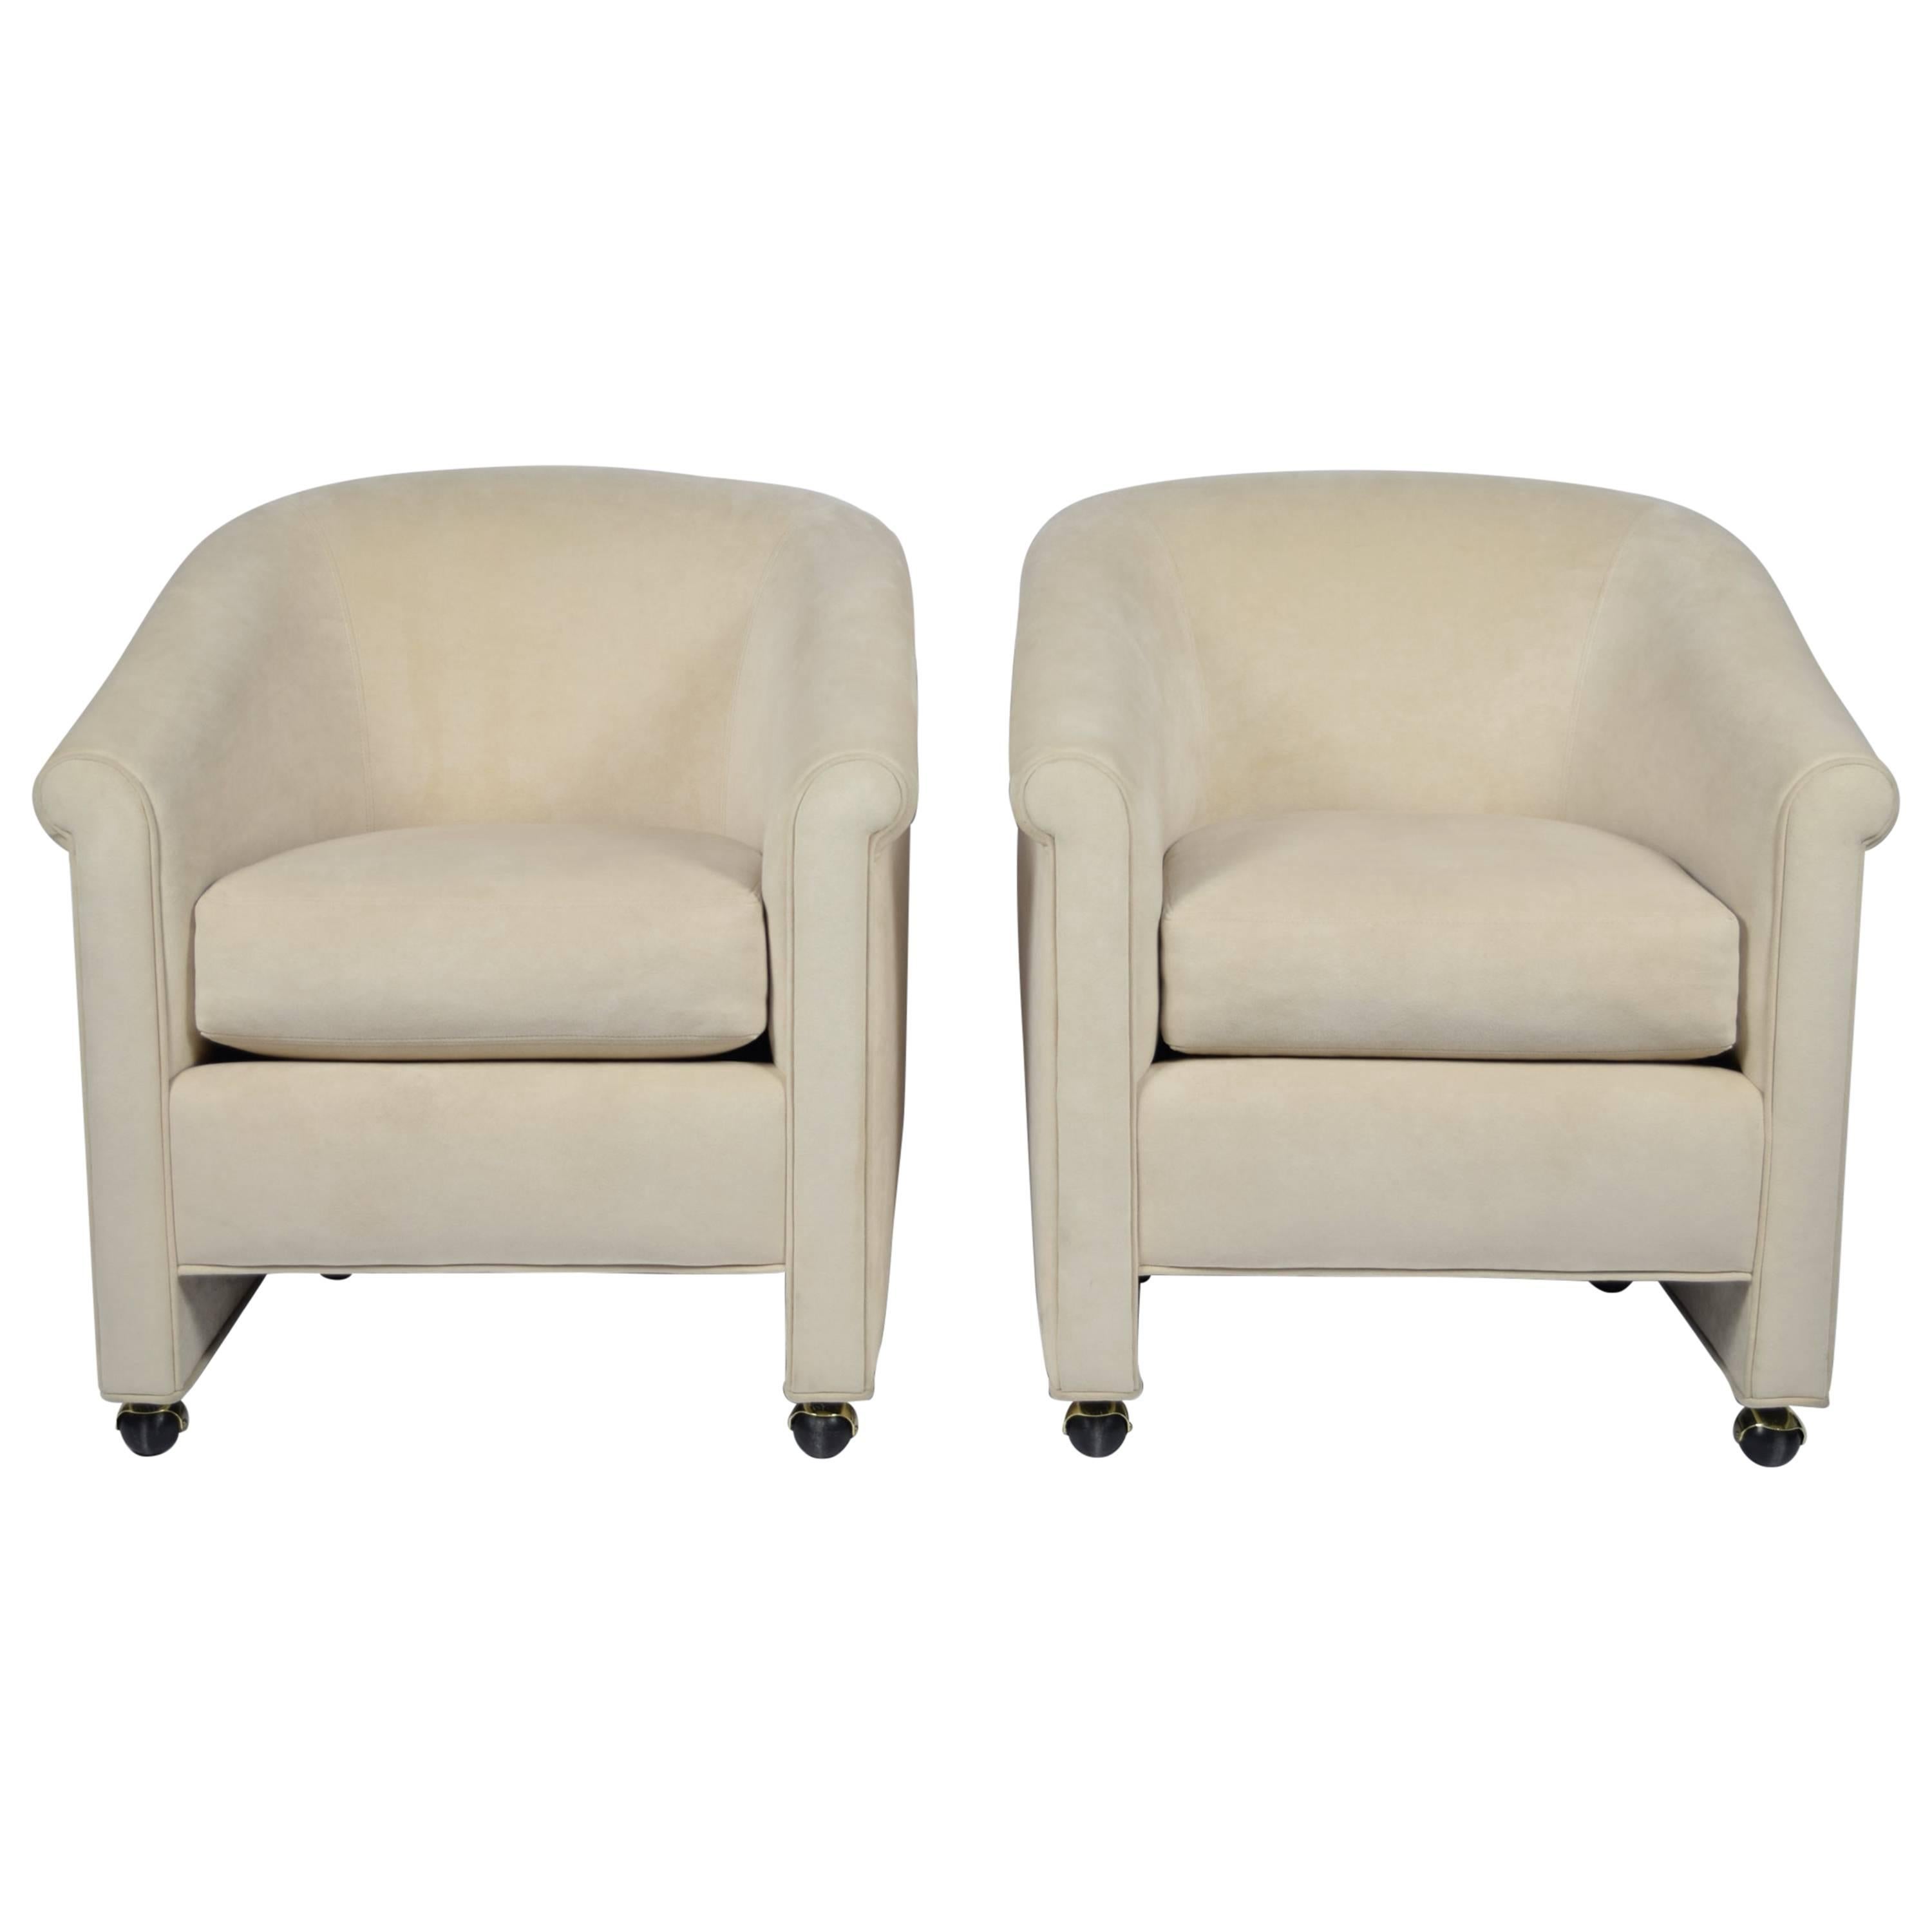 Set of Two A. Rudin Chairs on Casters